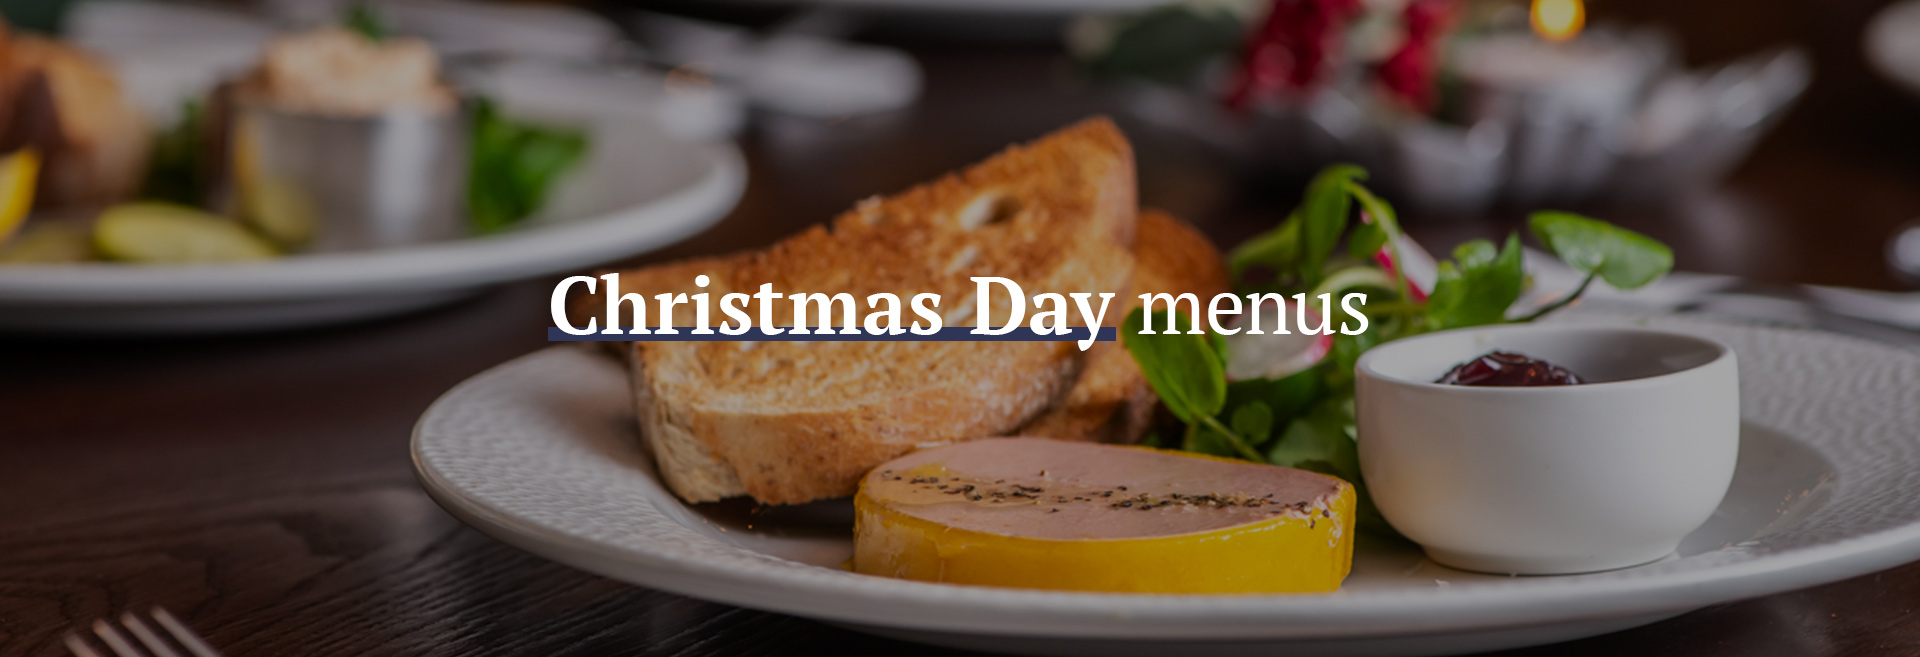 Christmas Day Menu at The Island Queen